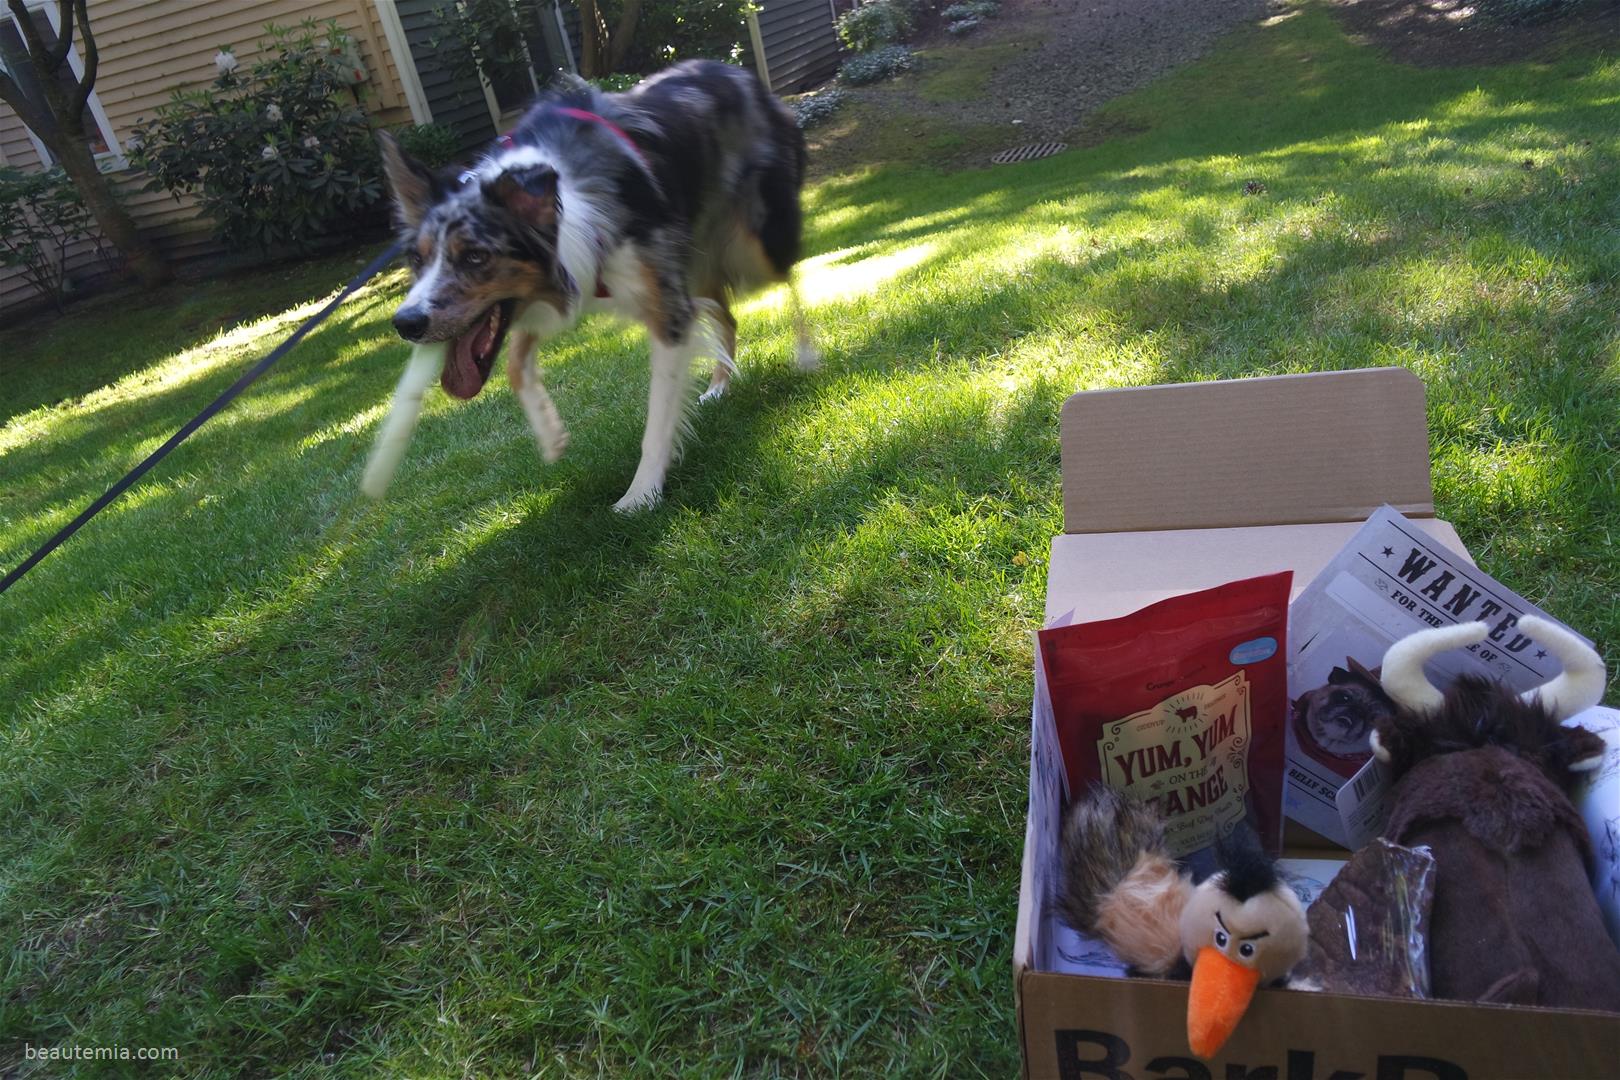 May Barkbox, border collies & monthly subscription box for large dogs